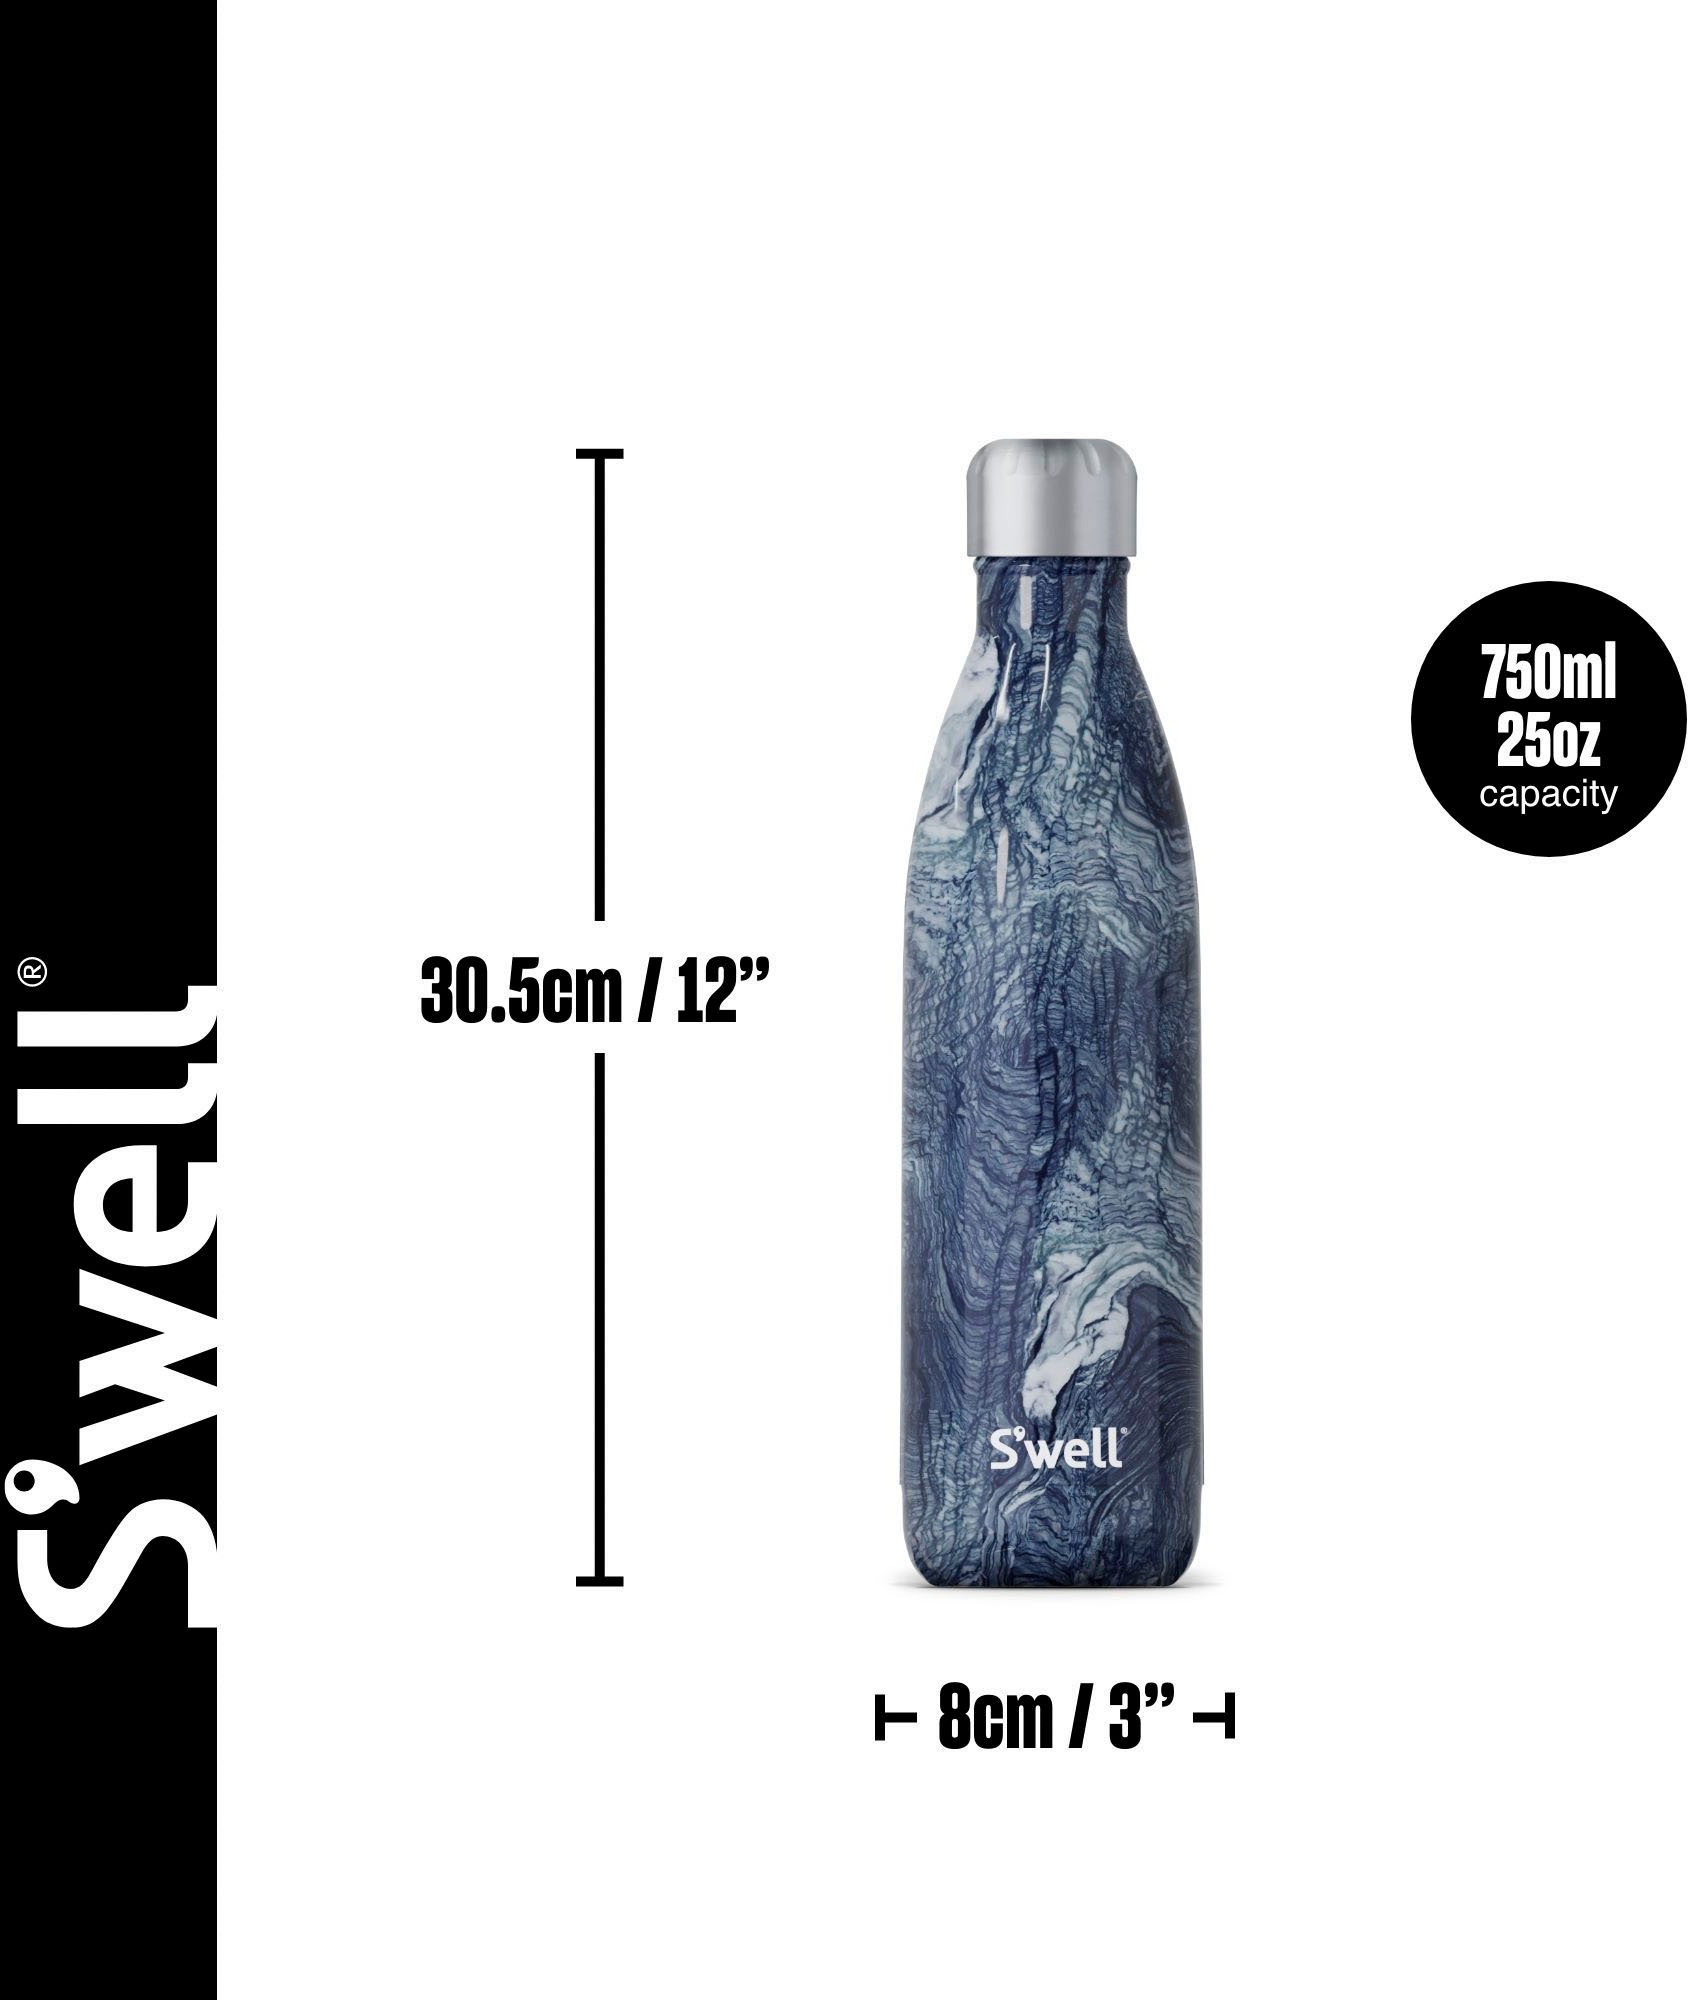 S'well Isolierflasche »S'well Topaz«, (1 tlg.), 750 ml